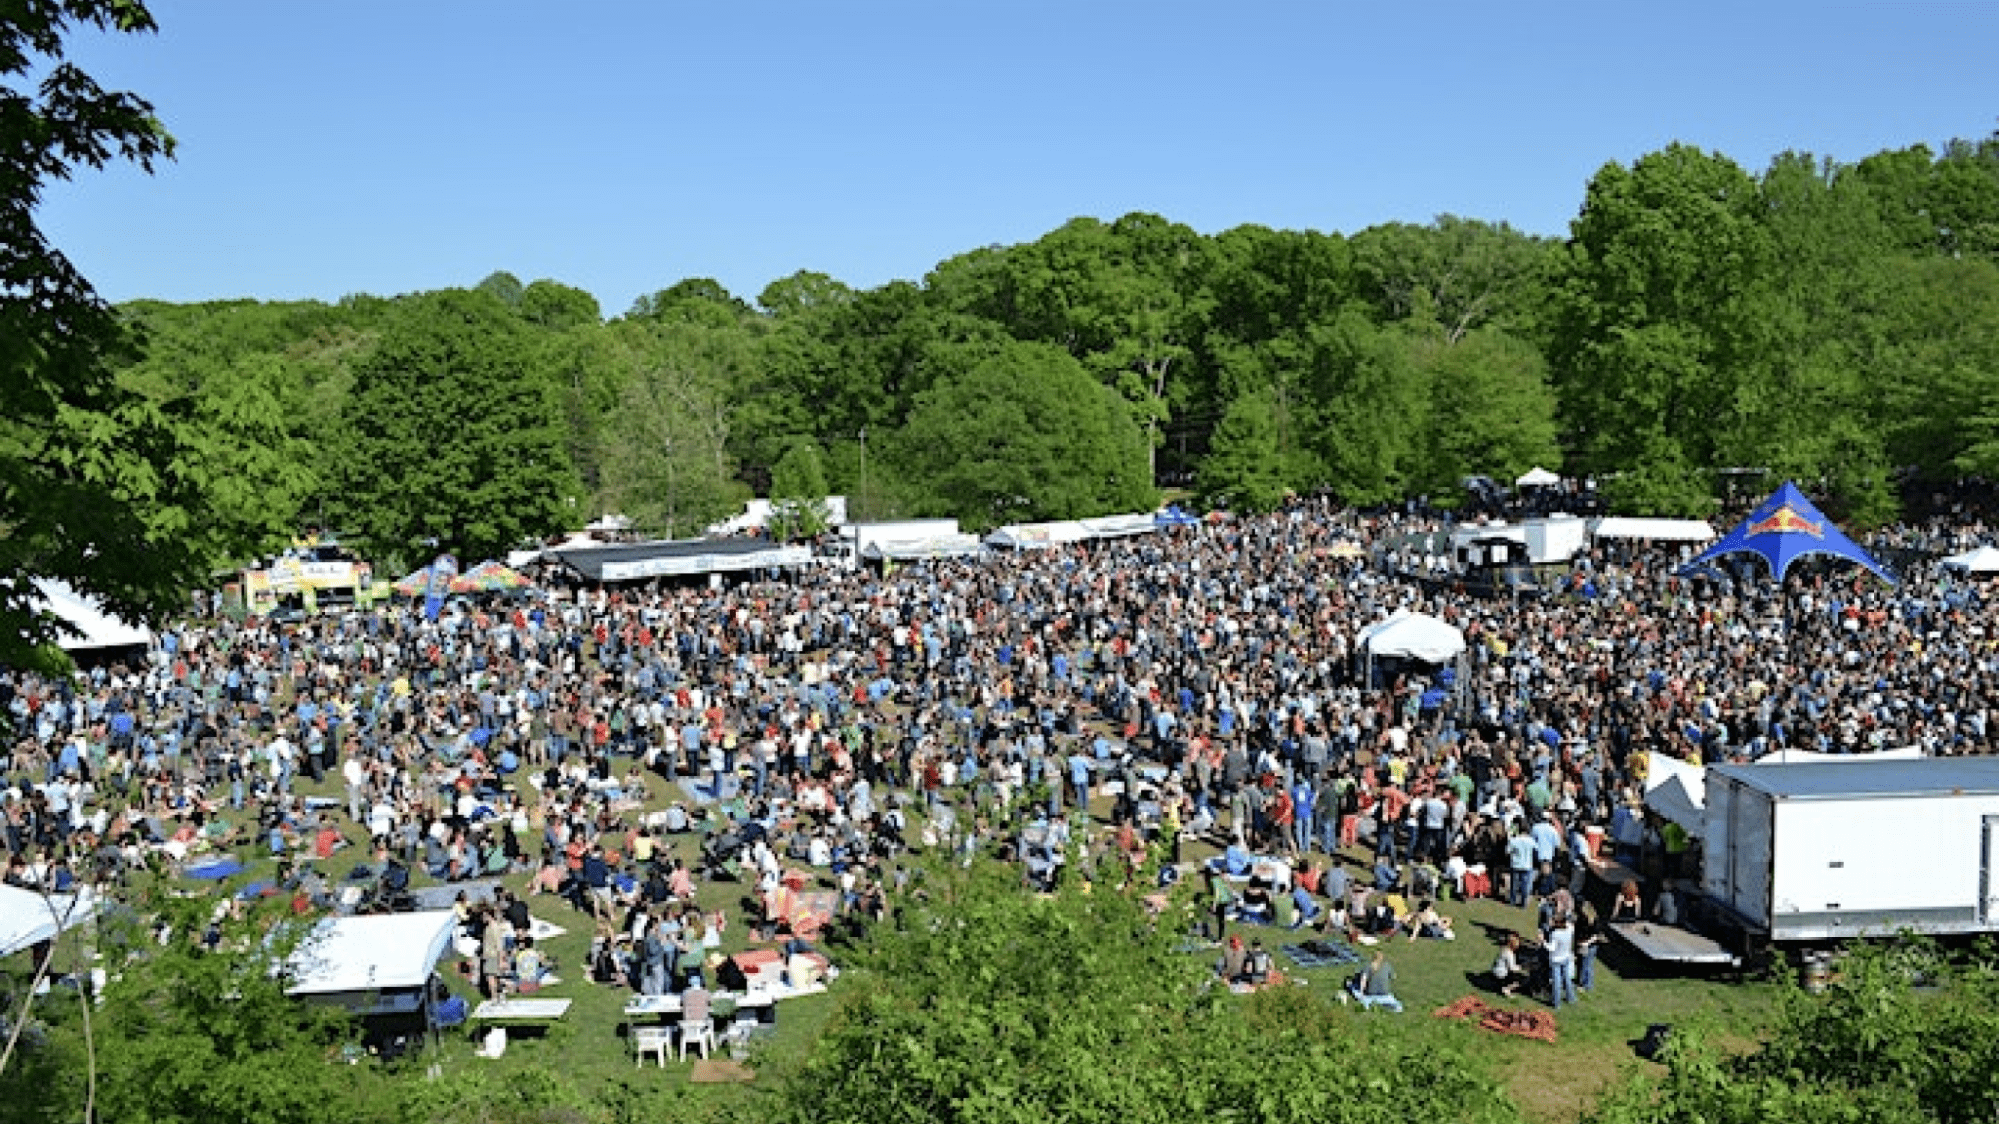 An aerial photo of a large, crowded event